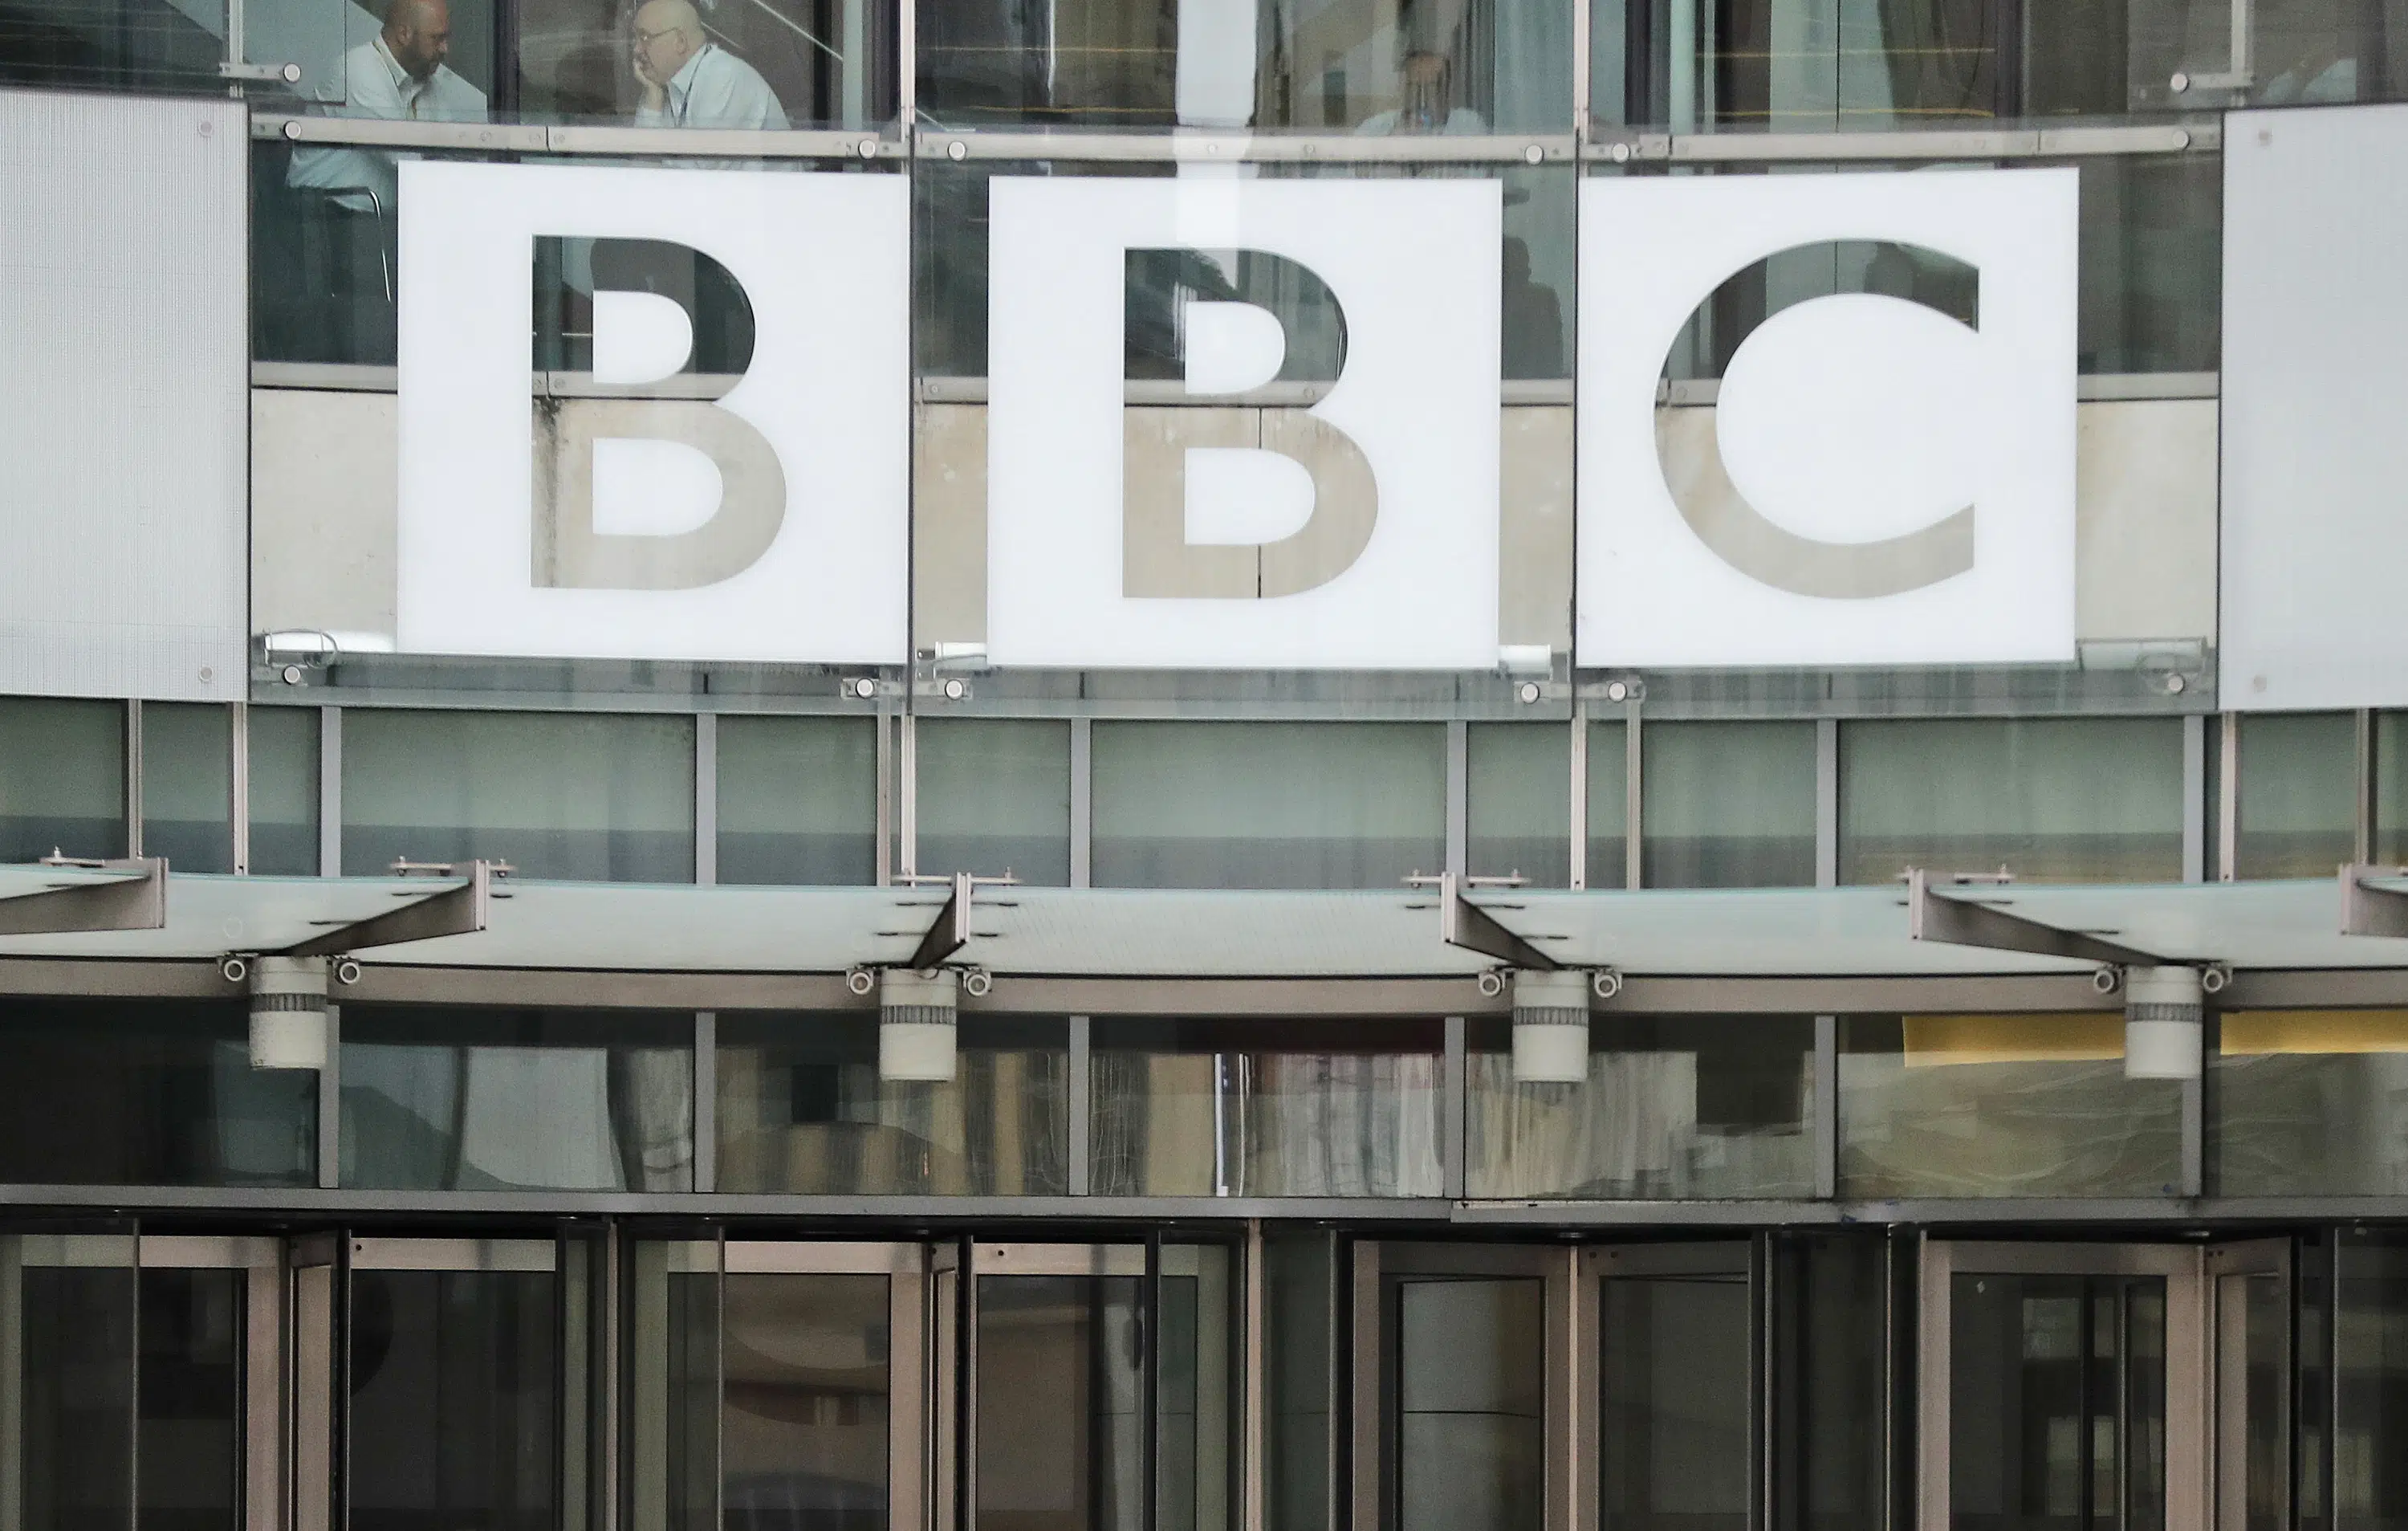 India tax officials search BBC offices weeks after Modi doc